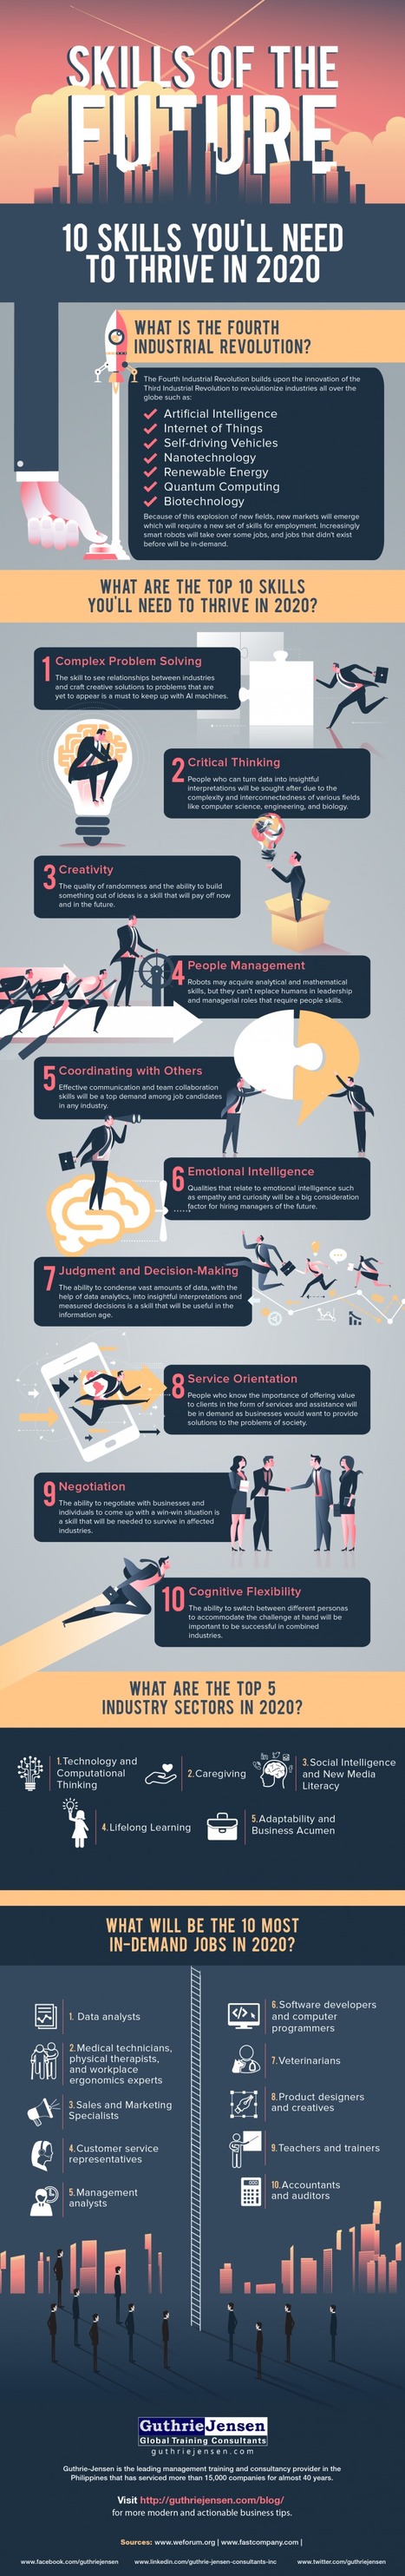 10 Hottest Jobs In 2020 And The Skills You Need [#Infographic]  | E-Learning-Inclusivo (Mashup) | Scoop.it